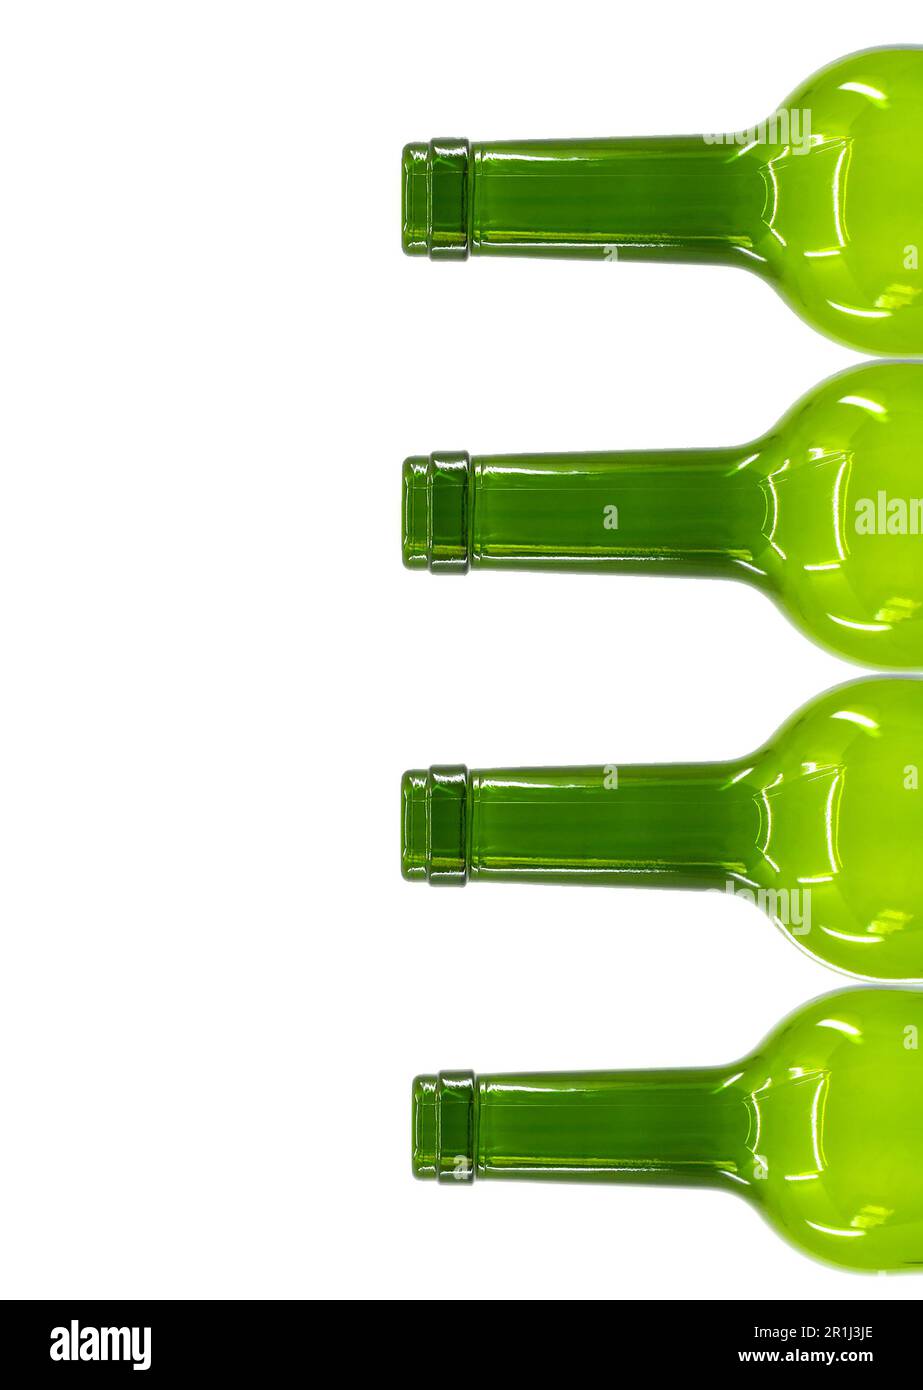 Tops and necks of empty wine bottles stacked on tyop of one another isolated on a plain white background. Alcohol consultion concept. Copy space. Stock Photo